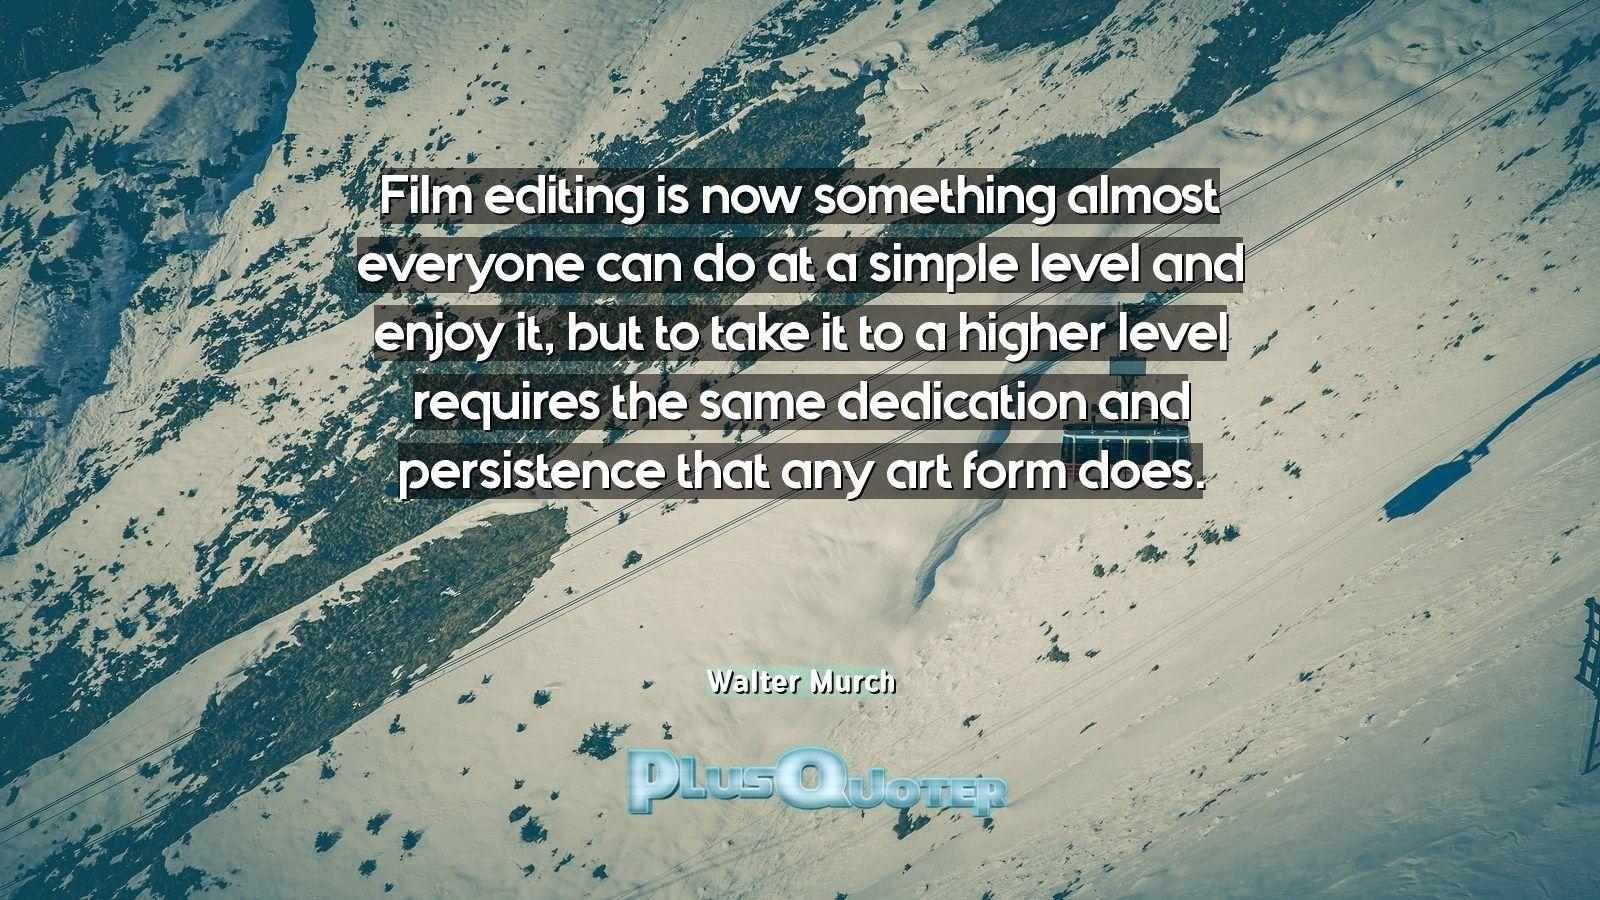 Film editing is now something almost everyone can do at a simple